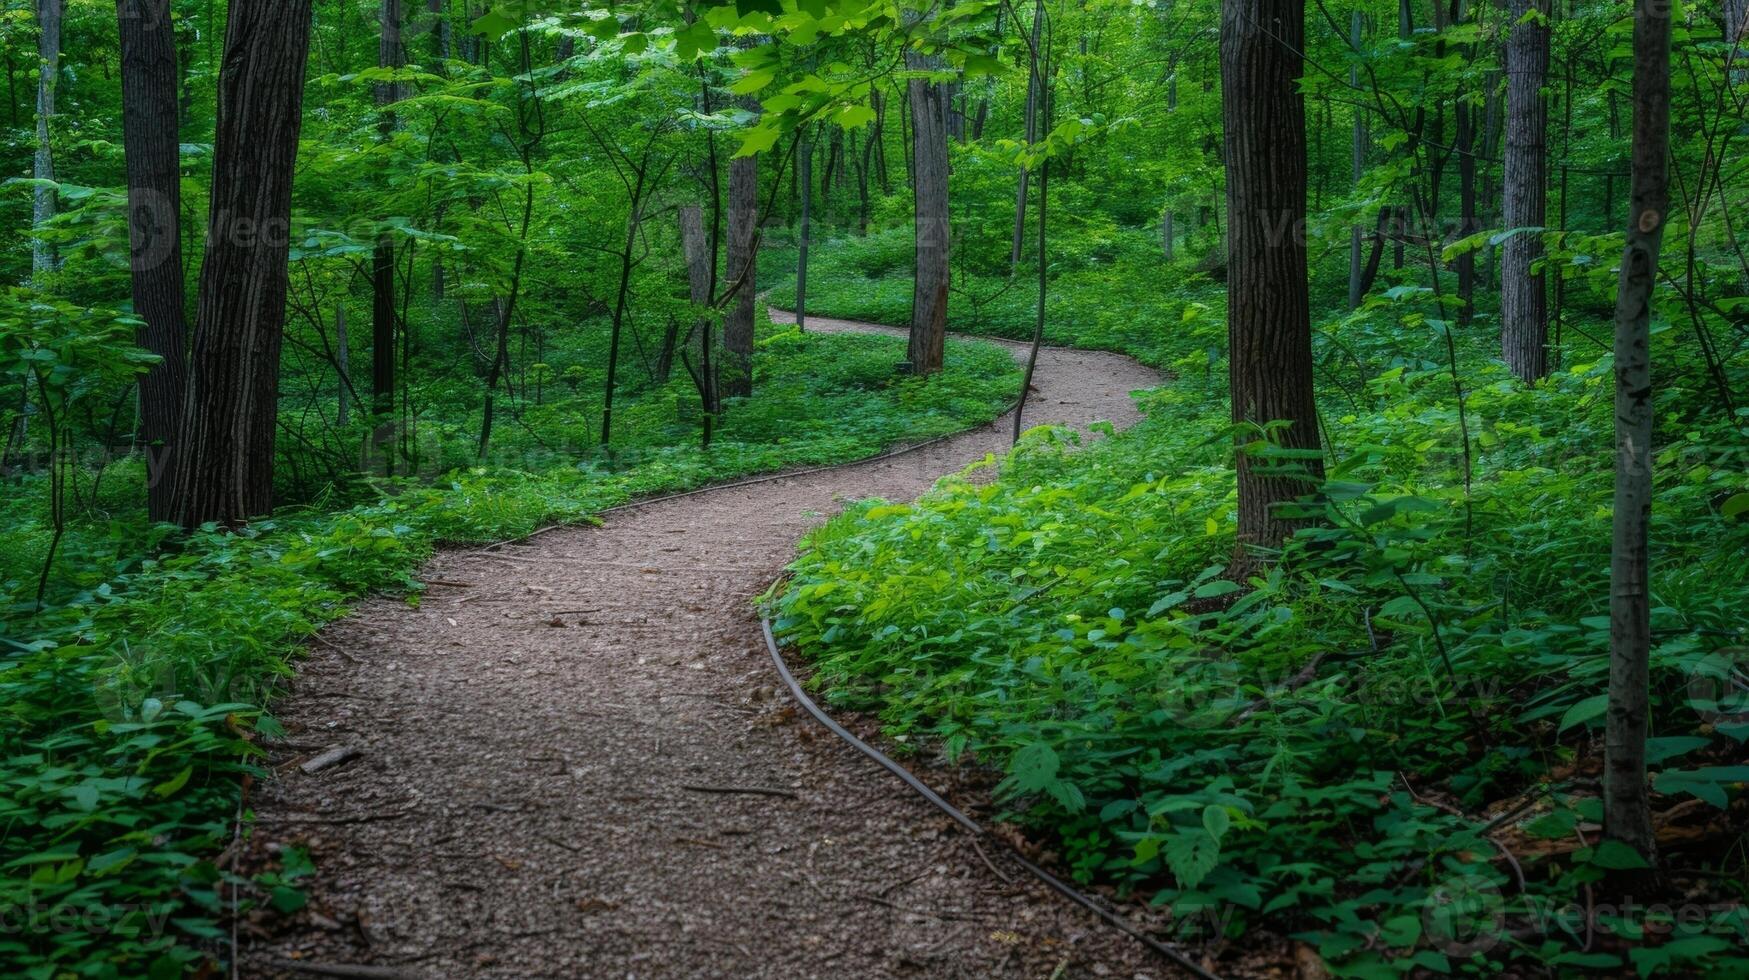 A winding path leads through a lush green forest. The sound of birds singing and leaves rustling in the gentle breeze fills the air photo